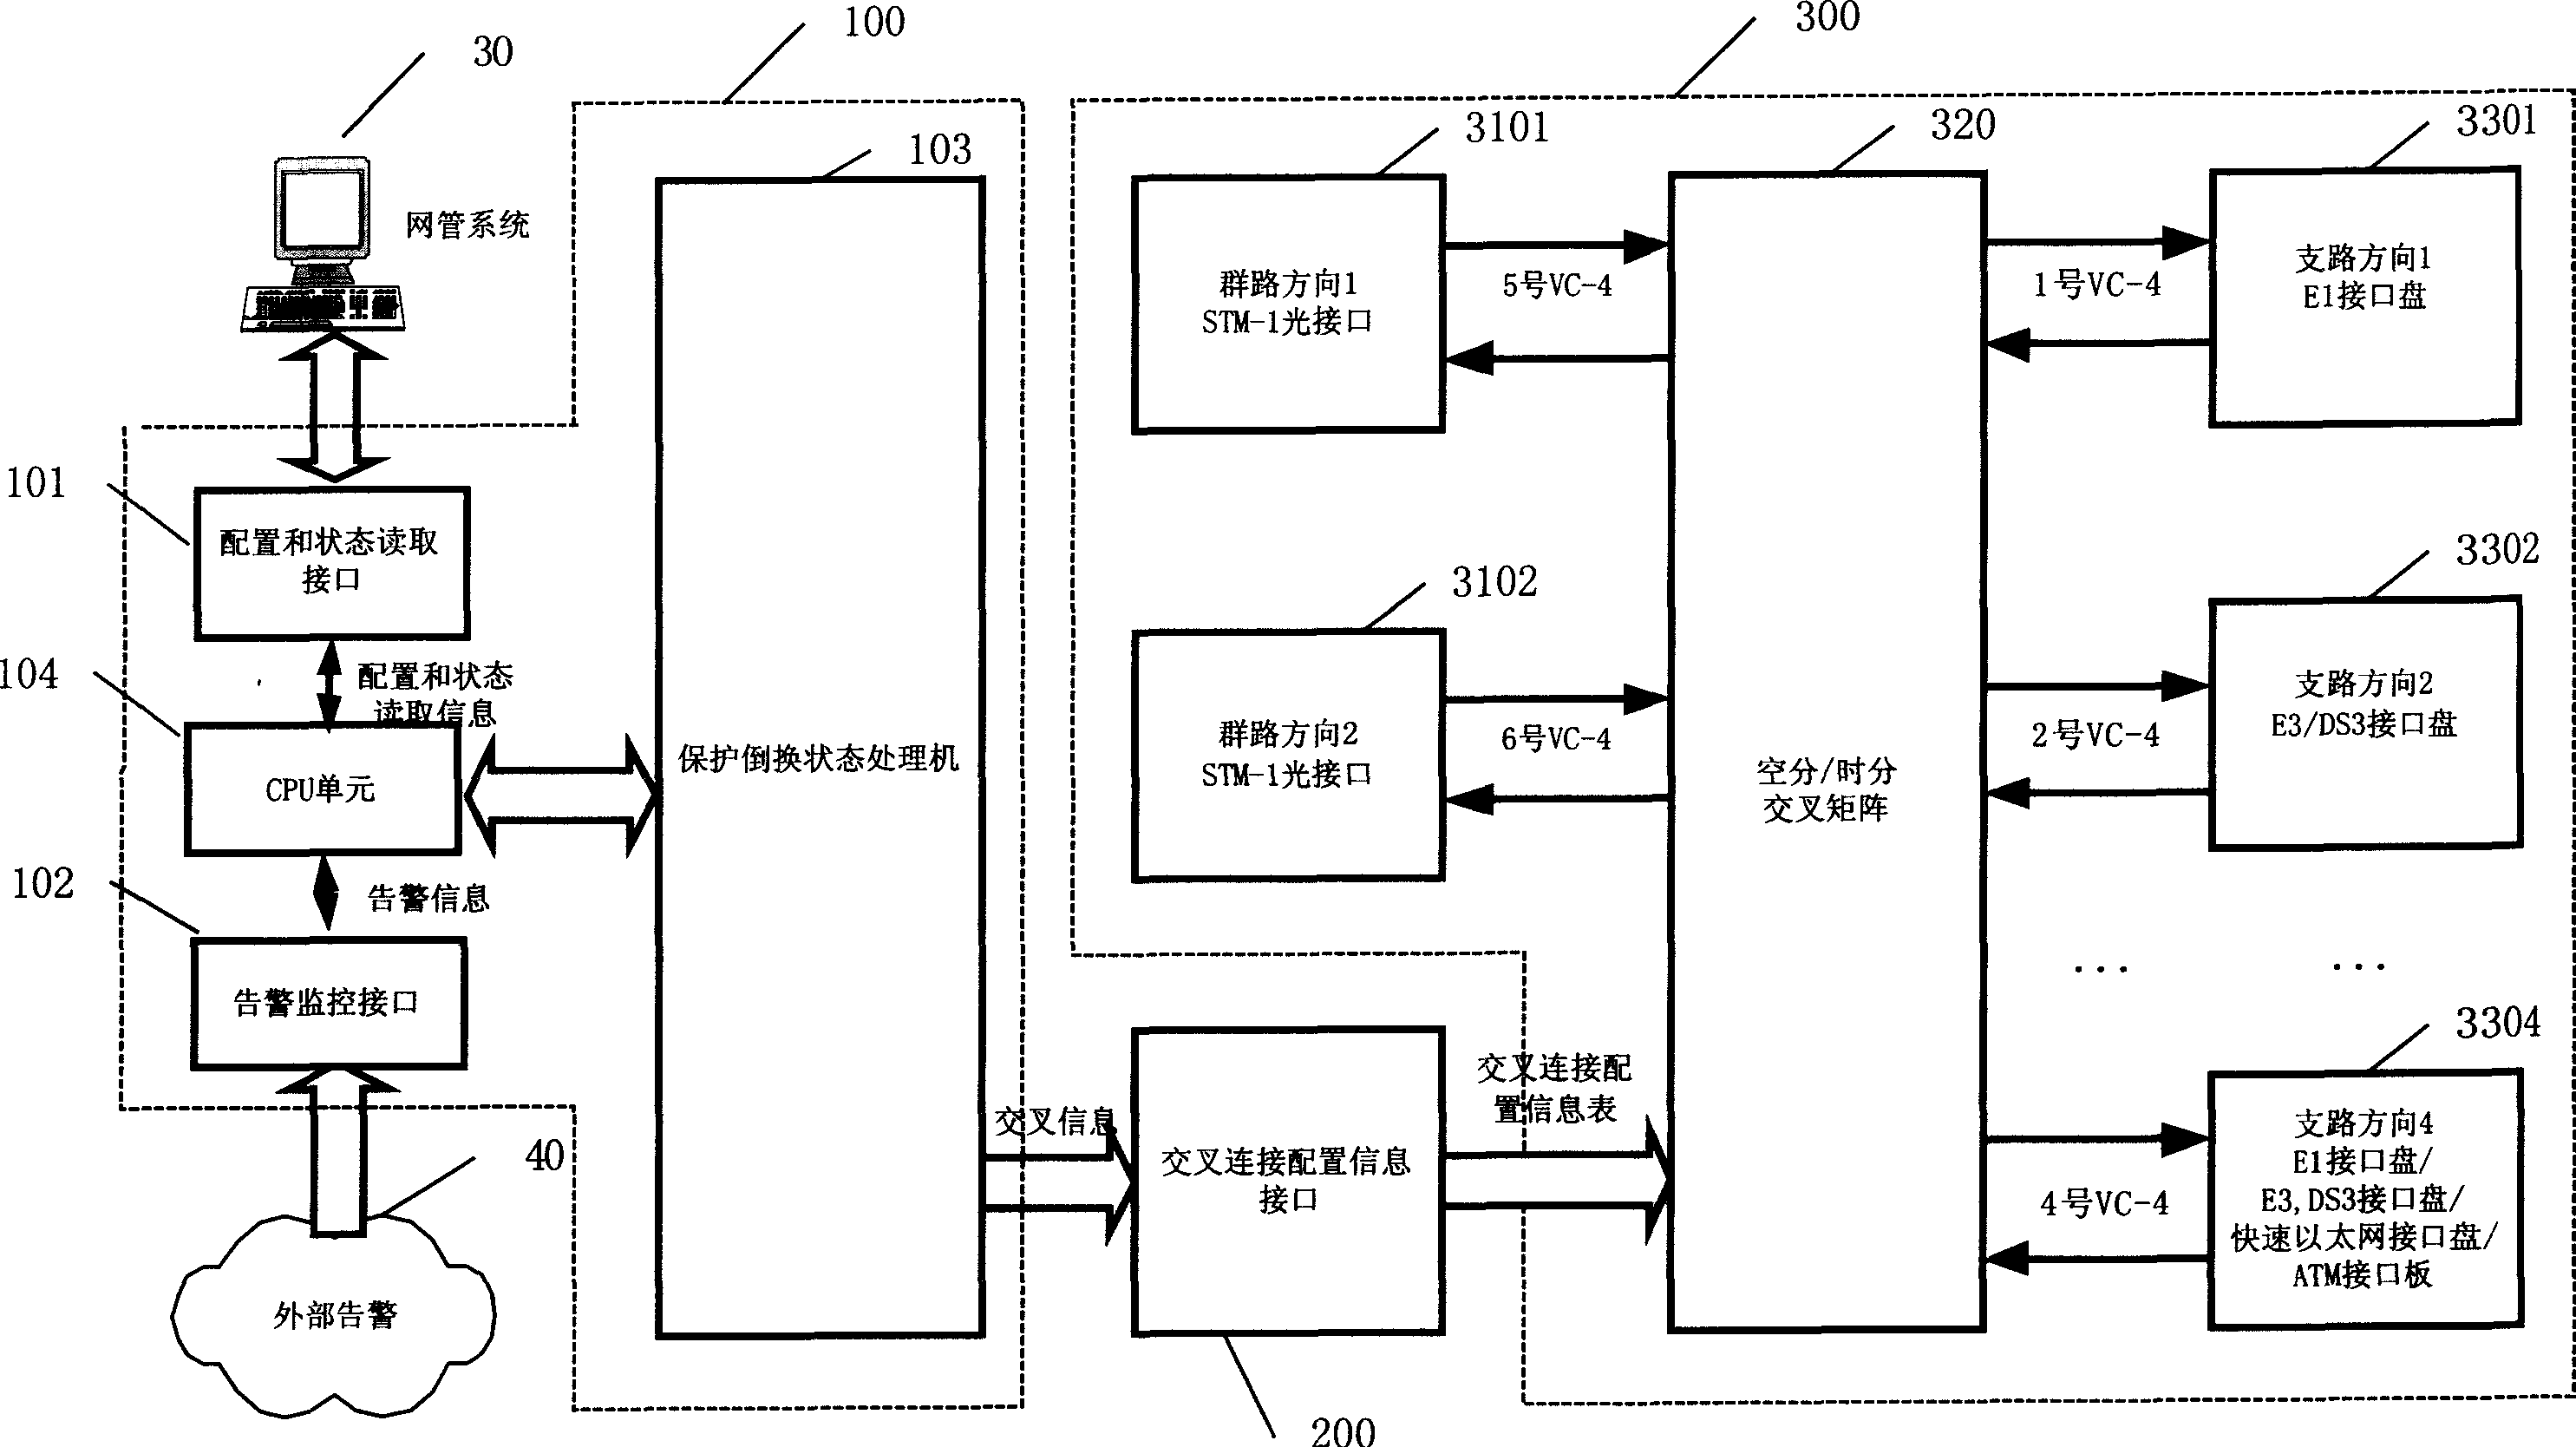 A cross connection system for implementing SDH service protection switching and automatic recovery